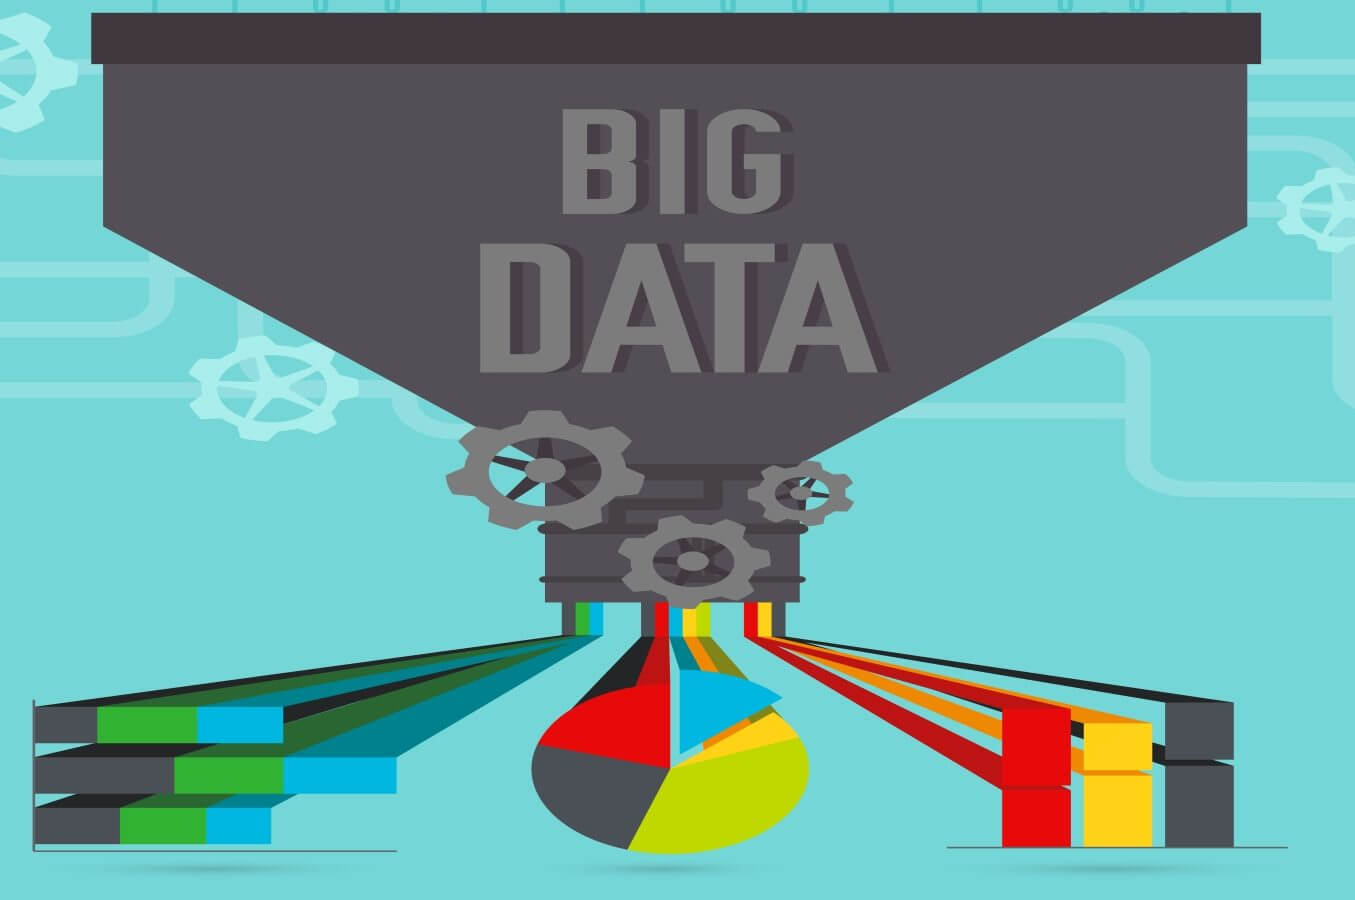 CAN BIG DATA HELP YOUR BUSINESS?